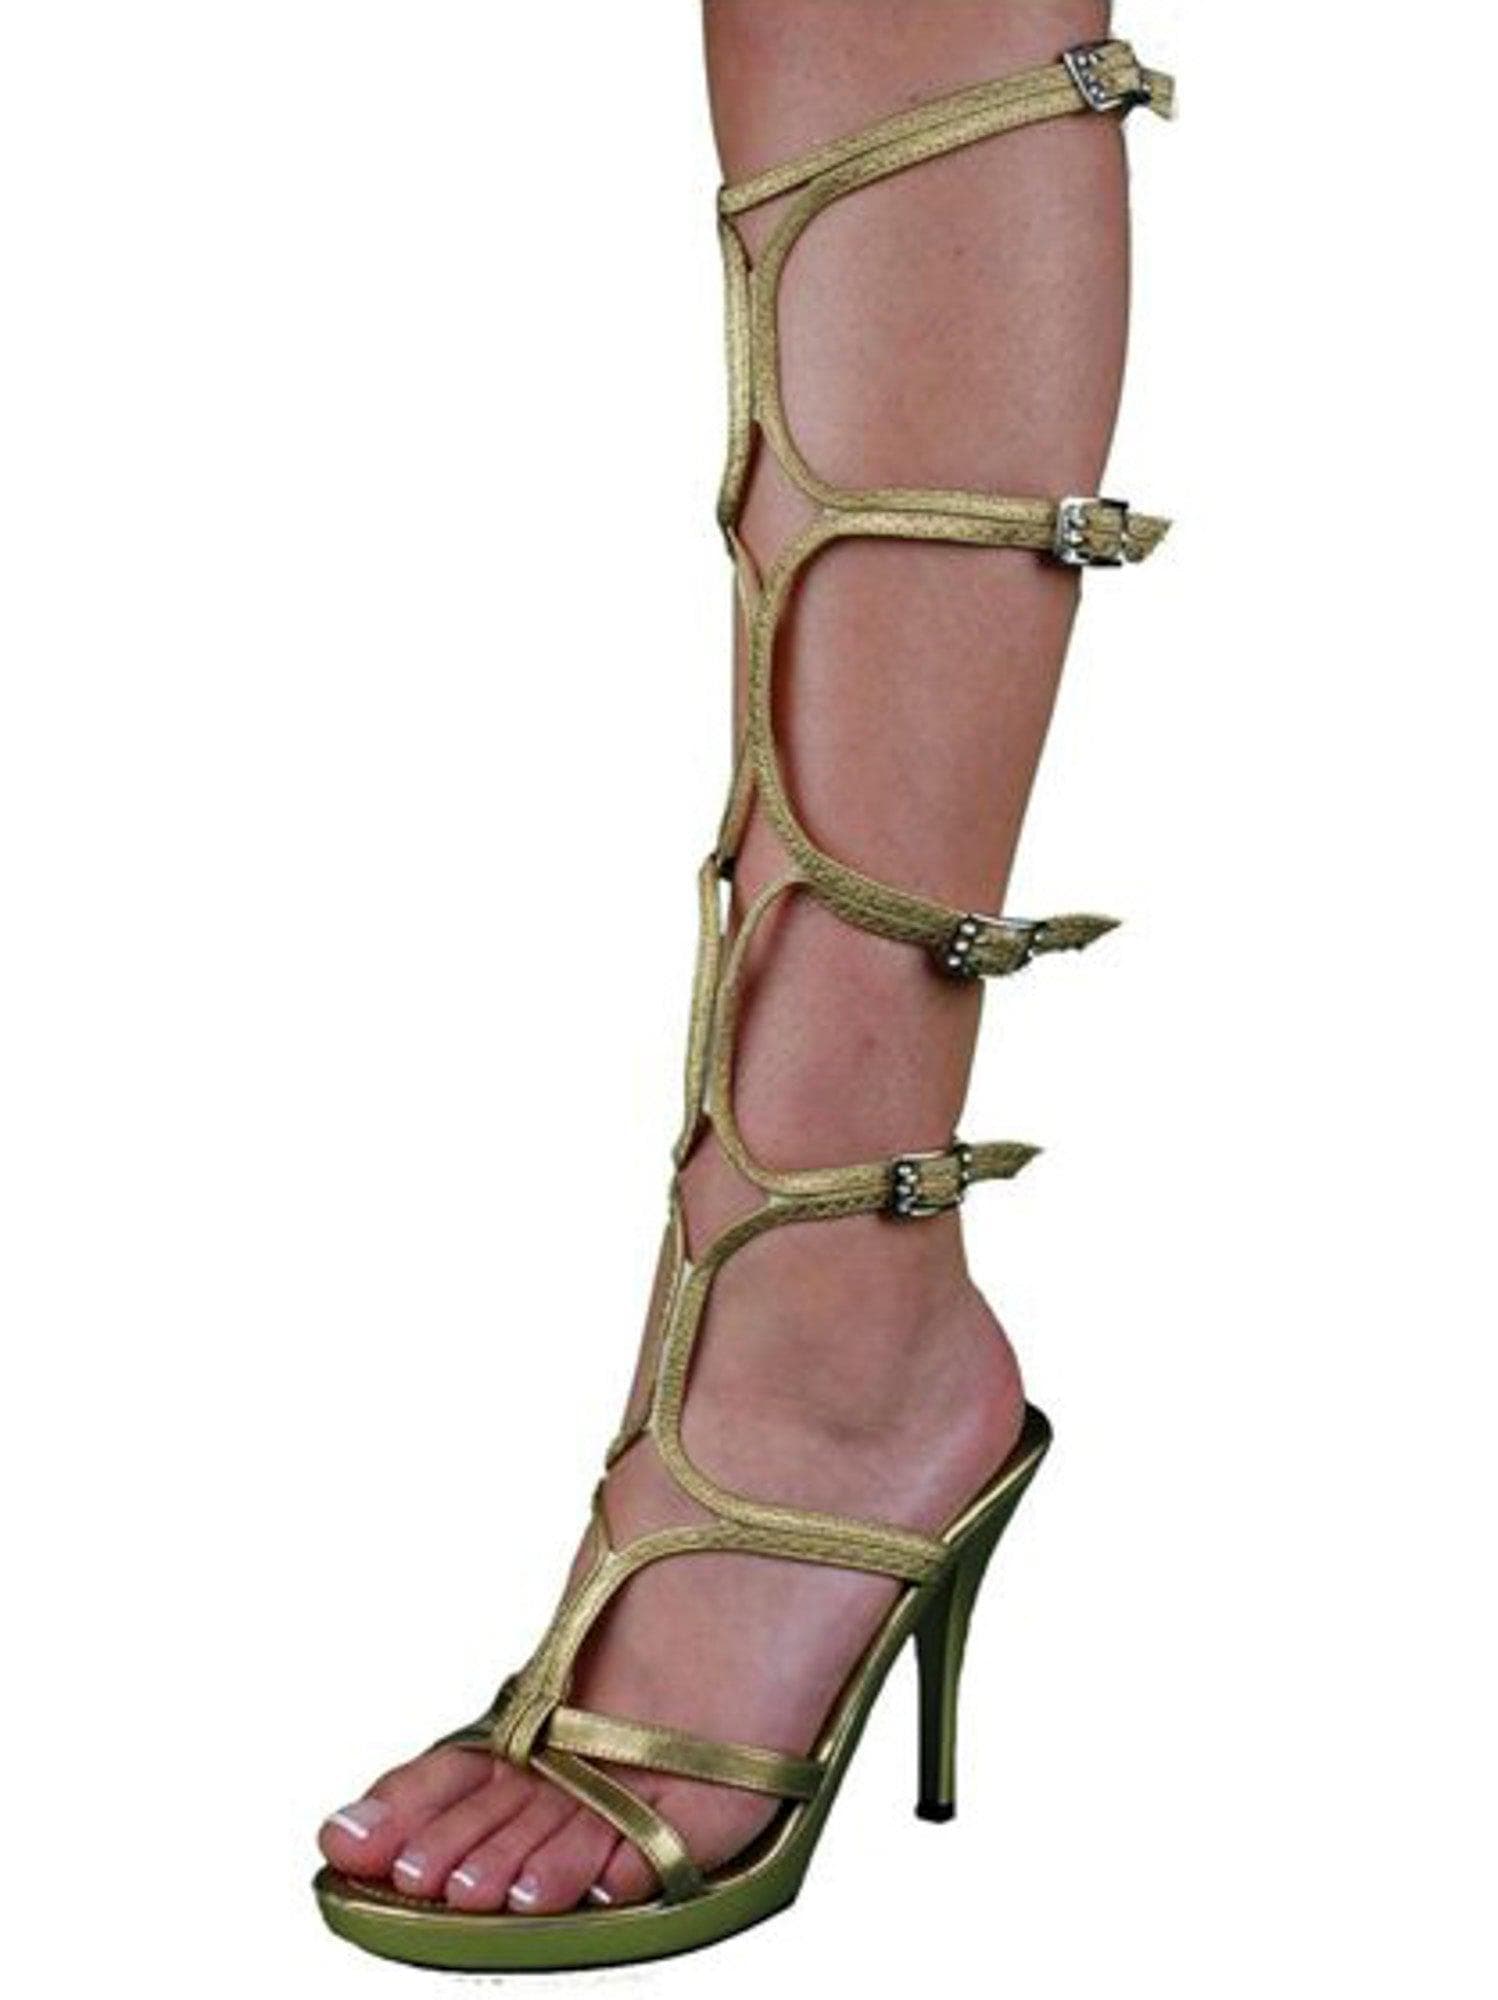 Adult Sexy Gold Gladiator Heeled Shoes - costumes.com